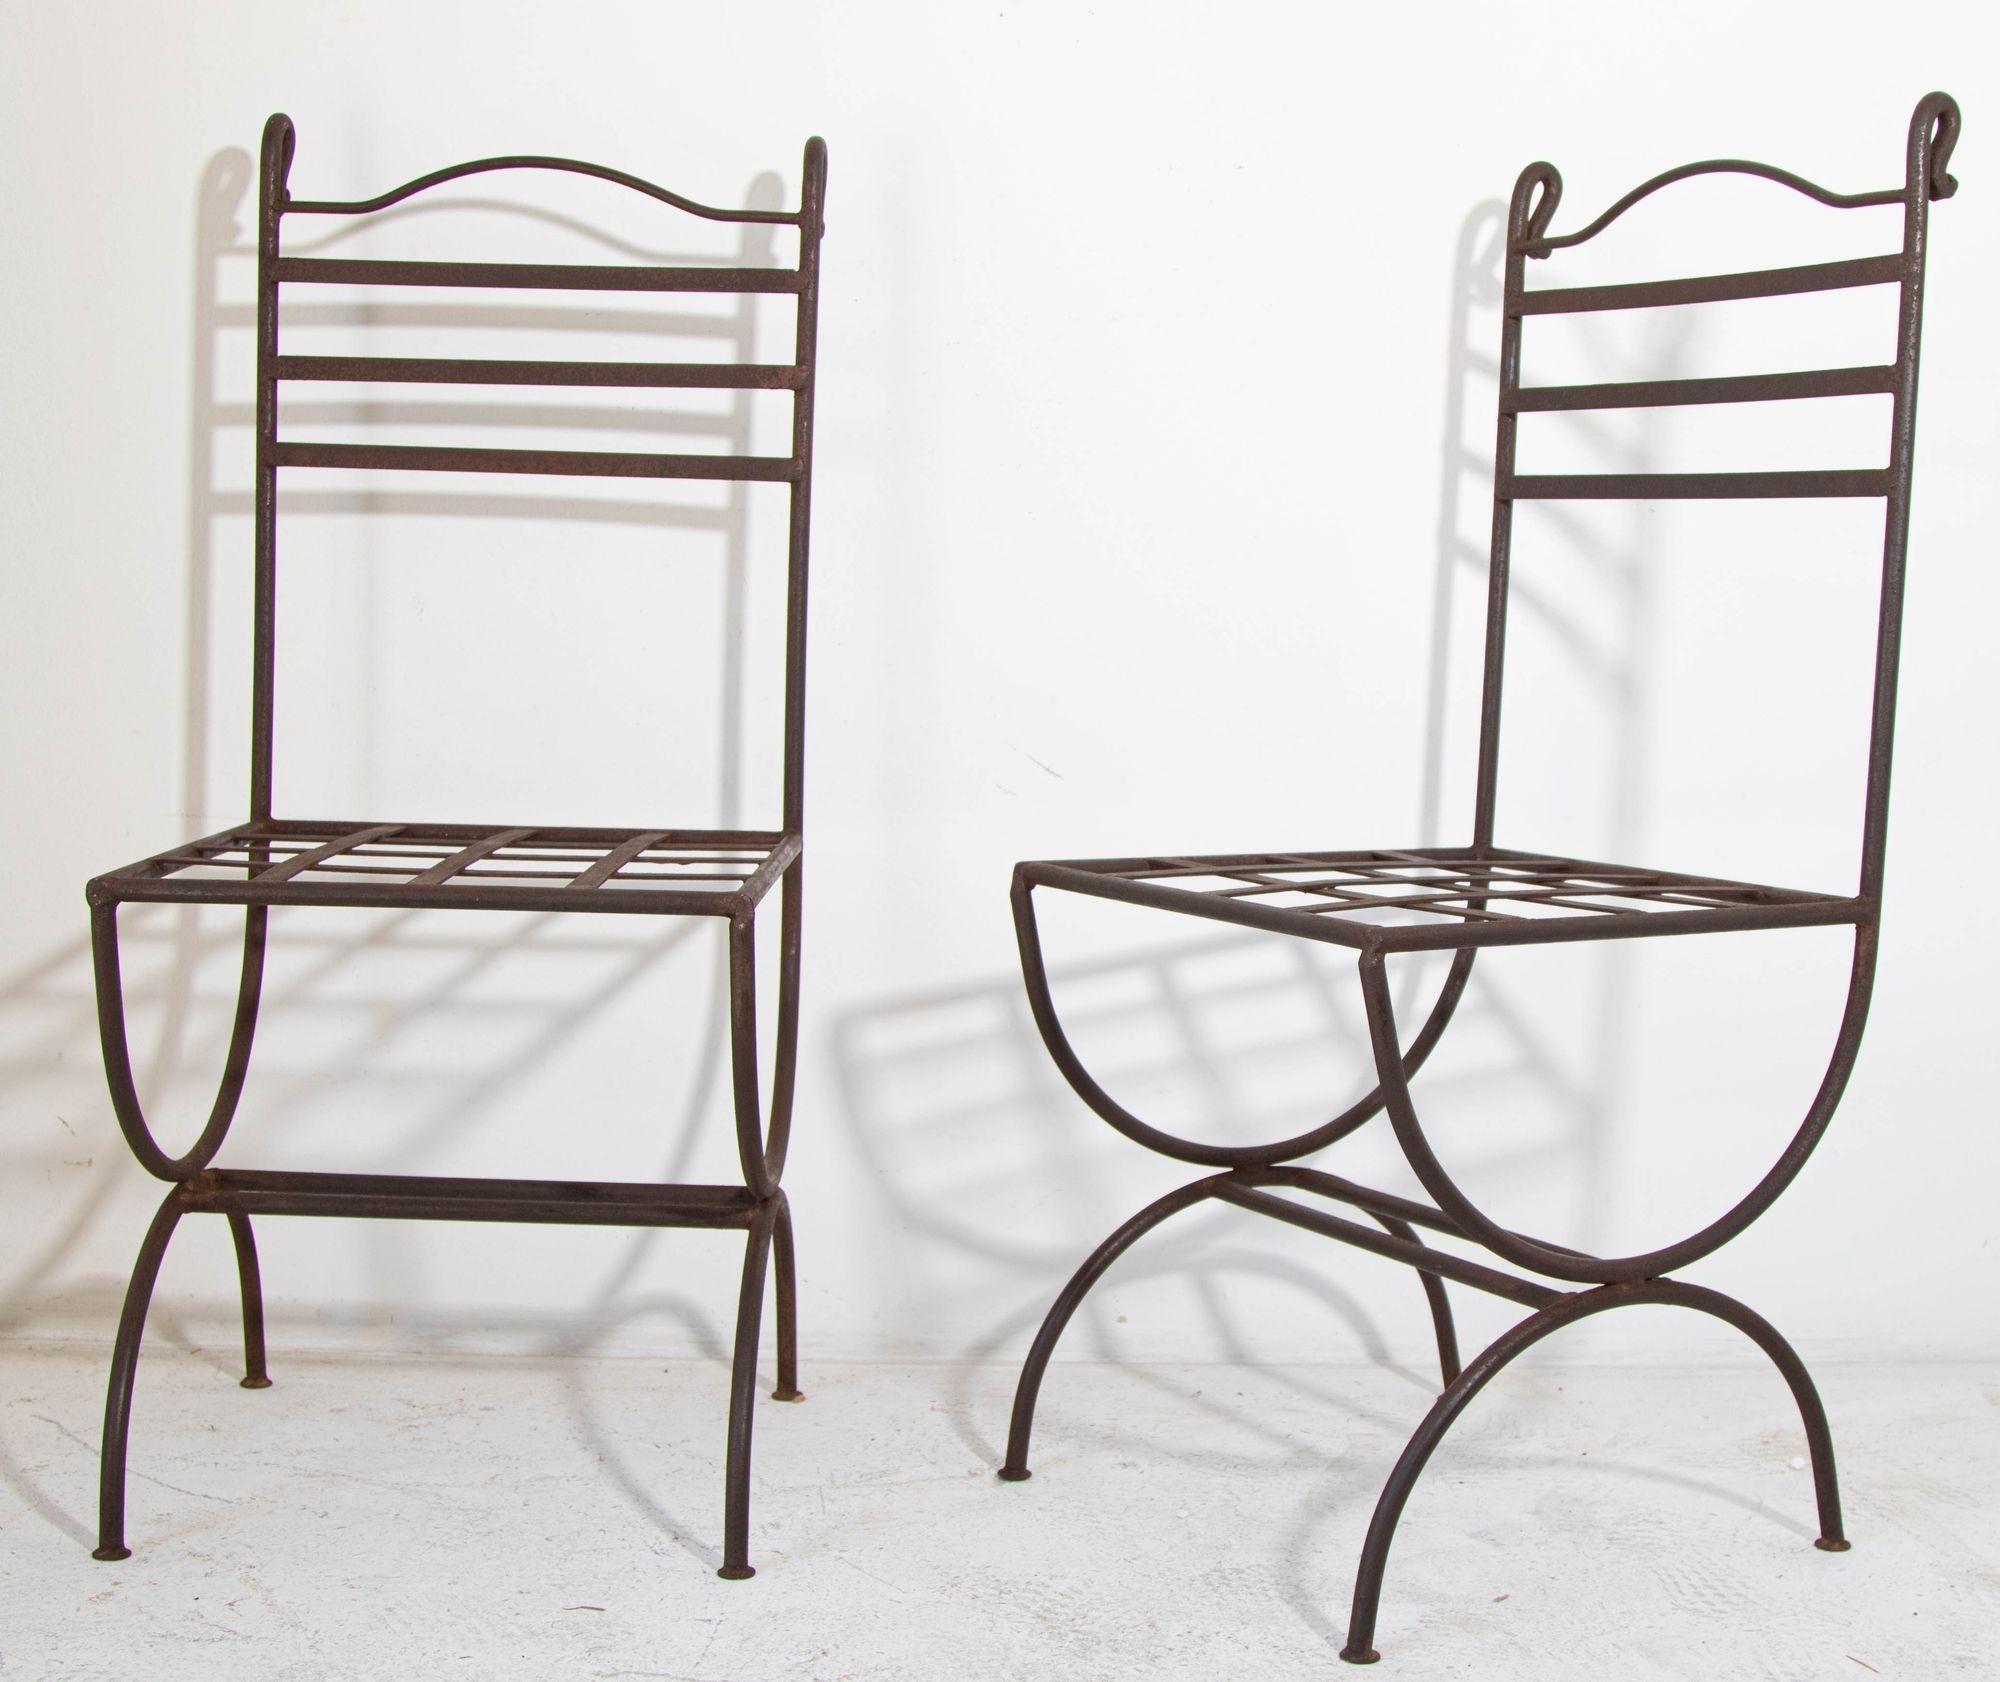 Vintage Hand forged wrought-Iron Outdoor French Provincial Chairs.
Handcrafted pair of wrought iron garden or patio chairs.
A wonderful take on Classic outdoor patio furniture, hand-crafted, wrought iron chairs with latticed seat.
An impressive